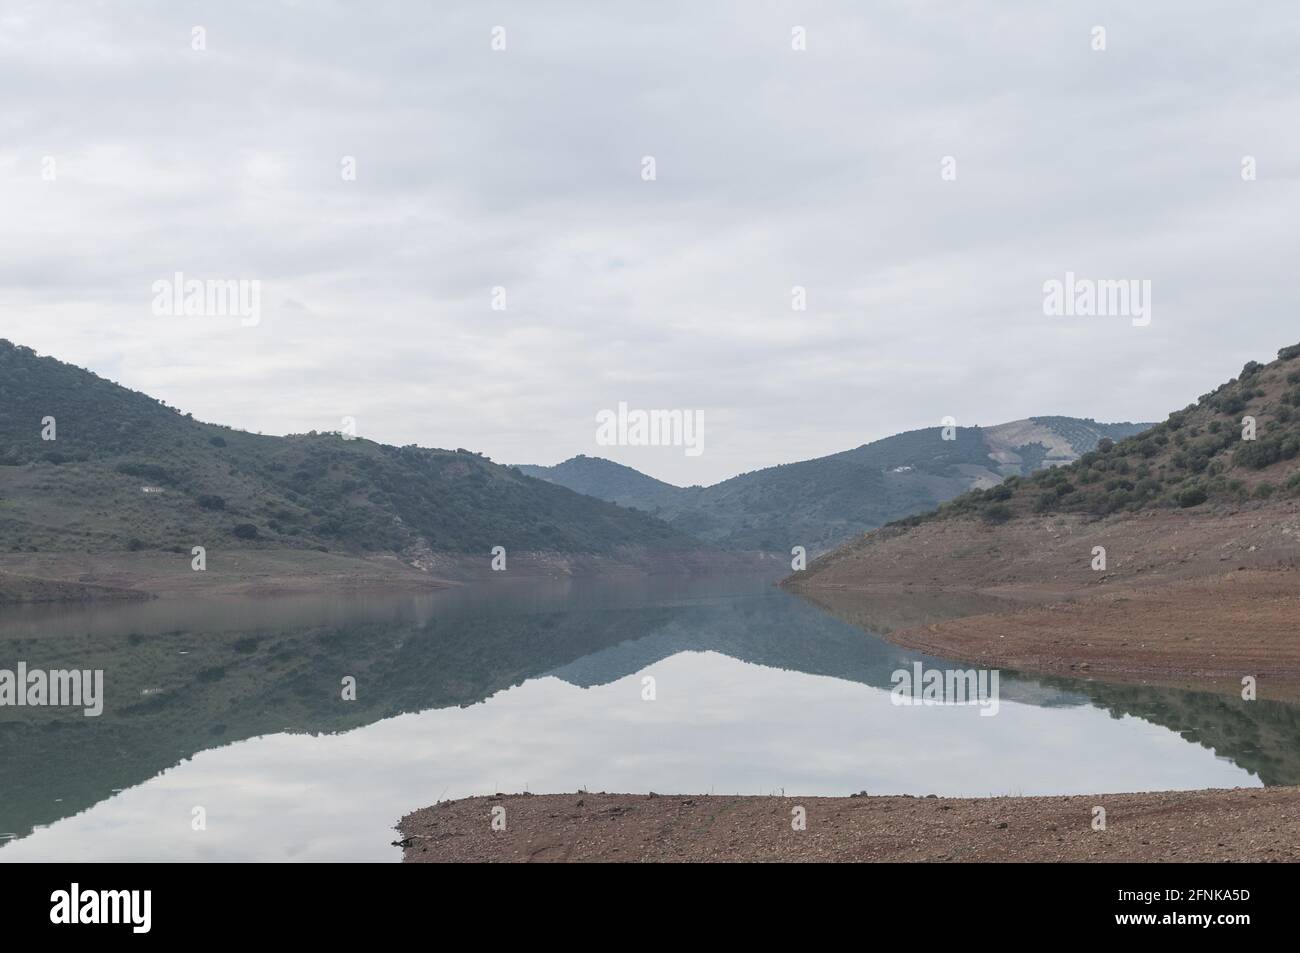 Stunning view of hills reflected on a tranquil mirror-like lake on a rainy day under a cloudy sky Stock Photo